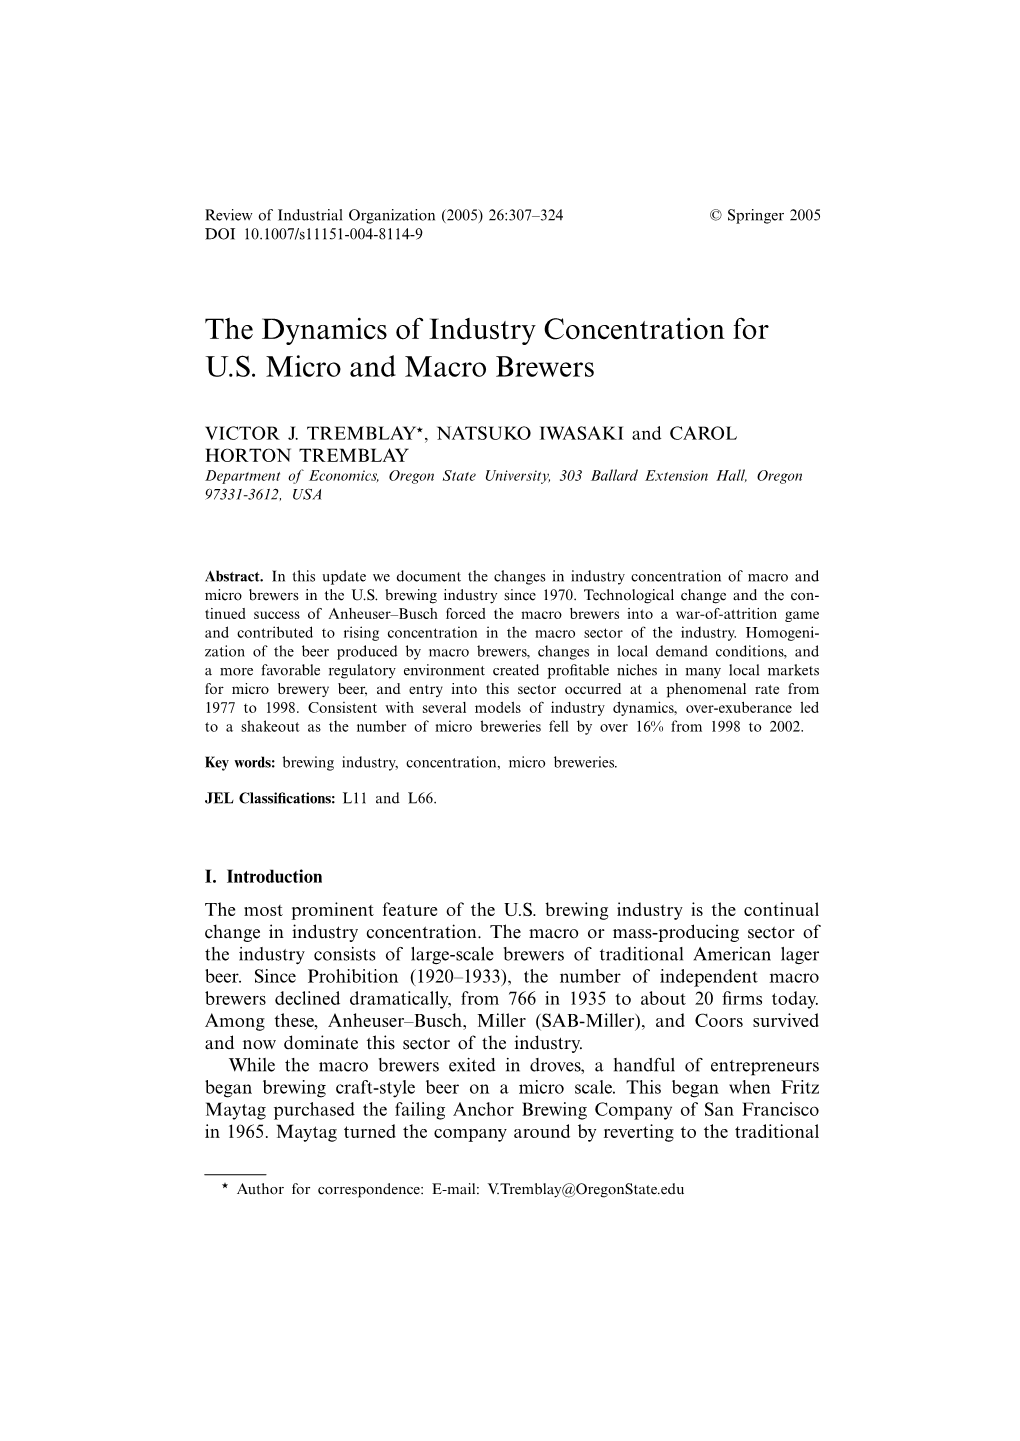 The Dynamics of Industry Concentration for U.S. Micro and Macro Brewers